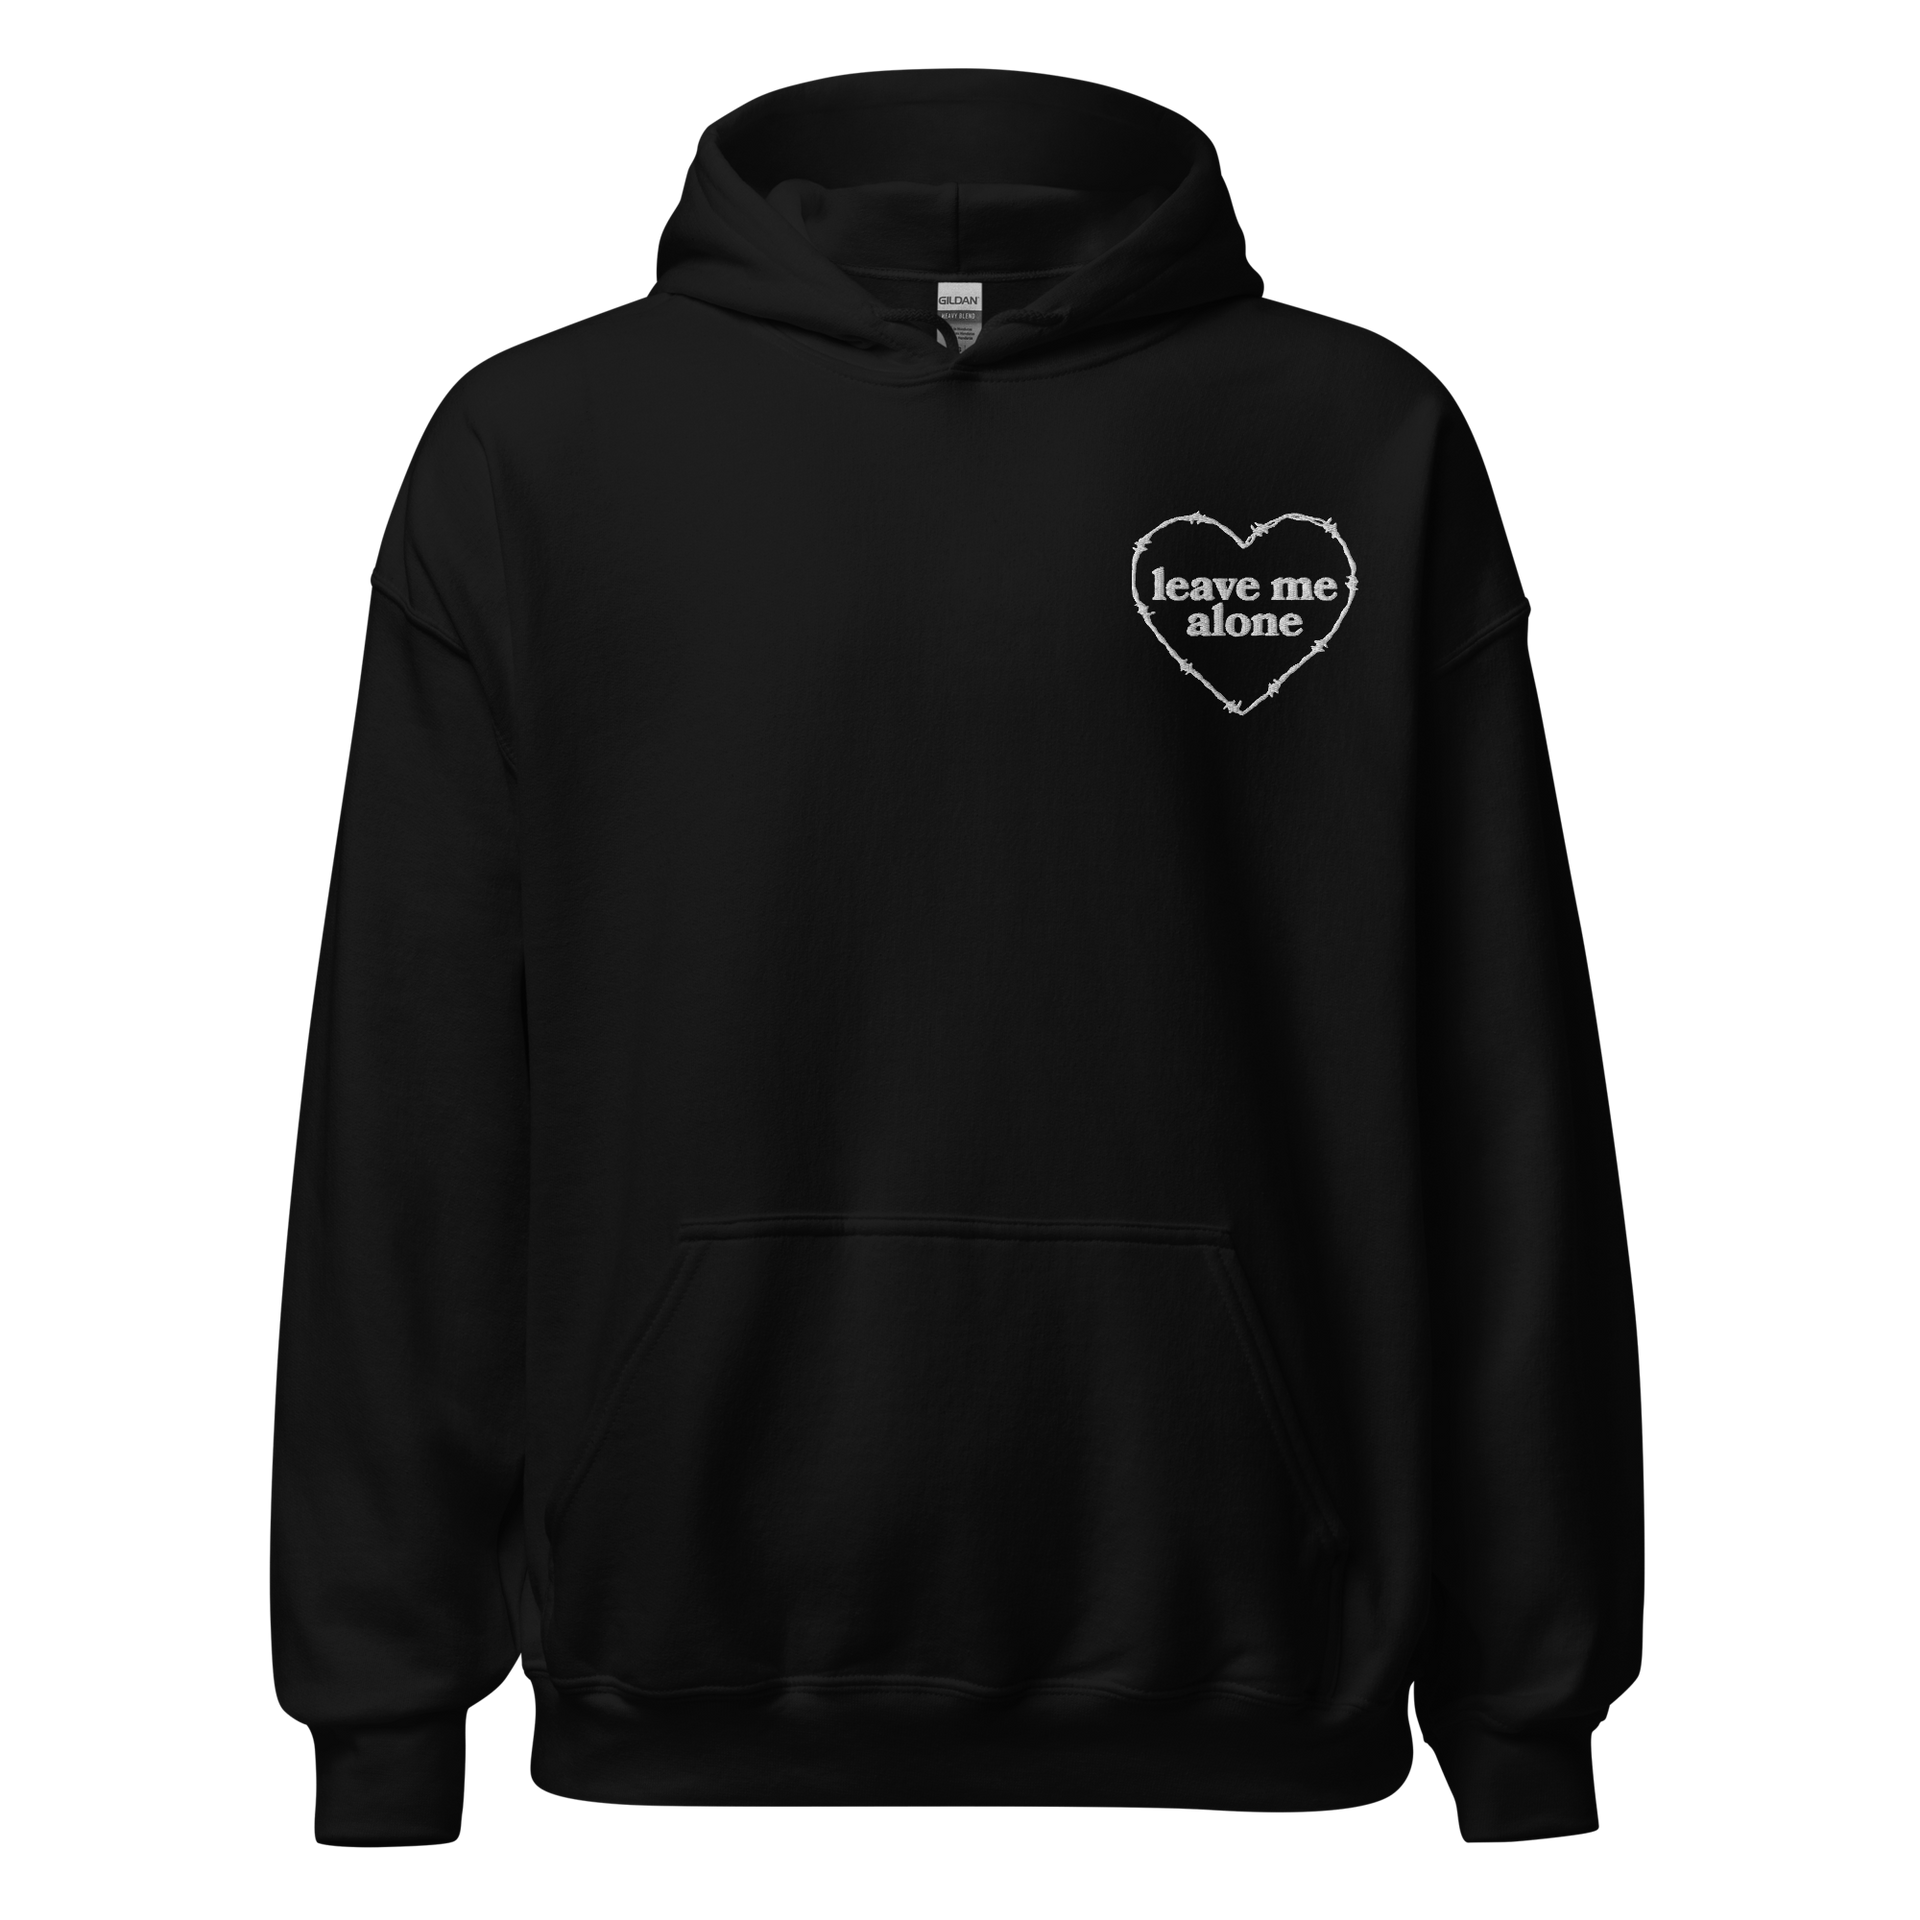 EMOTIONALLY EXHAUSTED EMBROIDERED HOODIE #embroidered #hoodie #back  EMOTIONALLY EXHAUSTED EMBROIDERED…